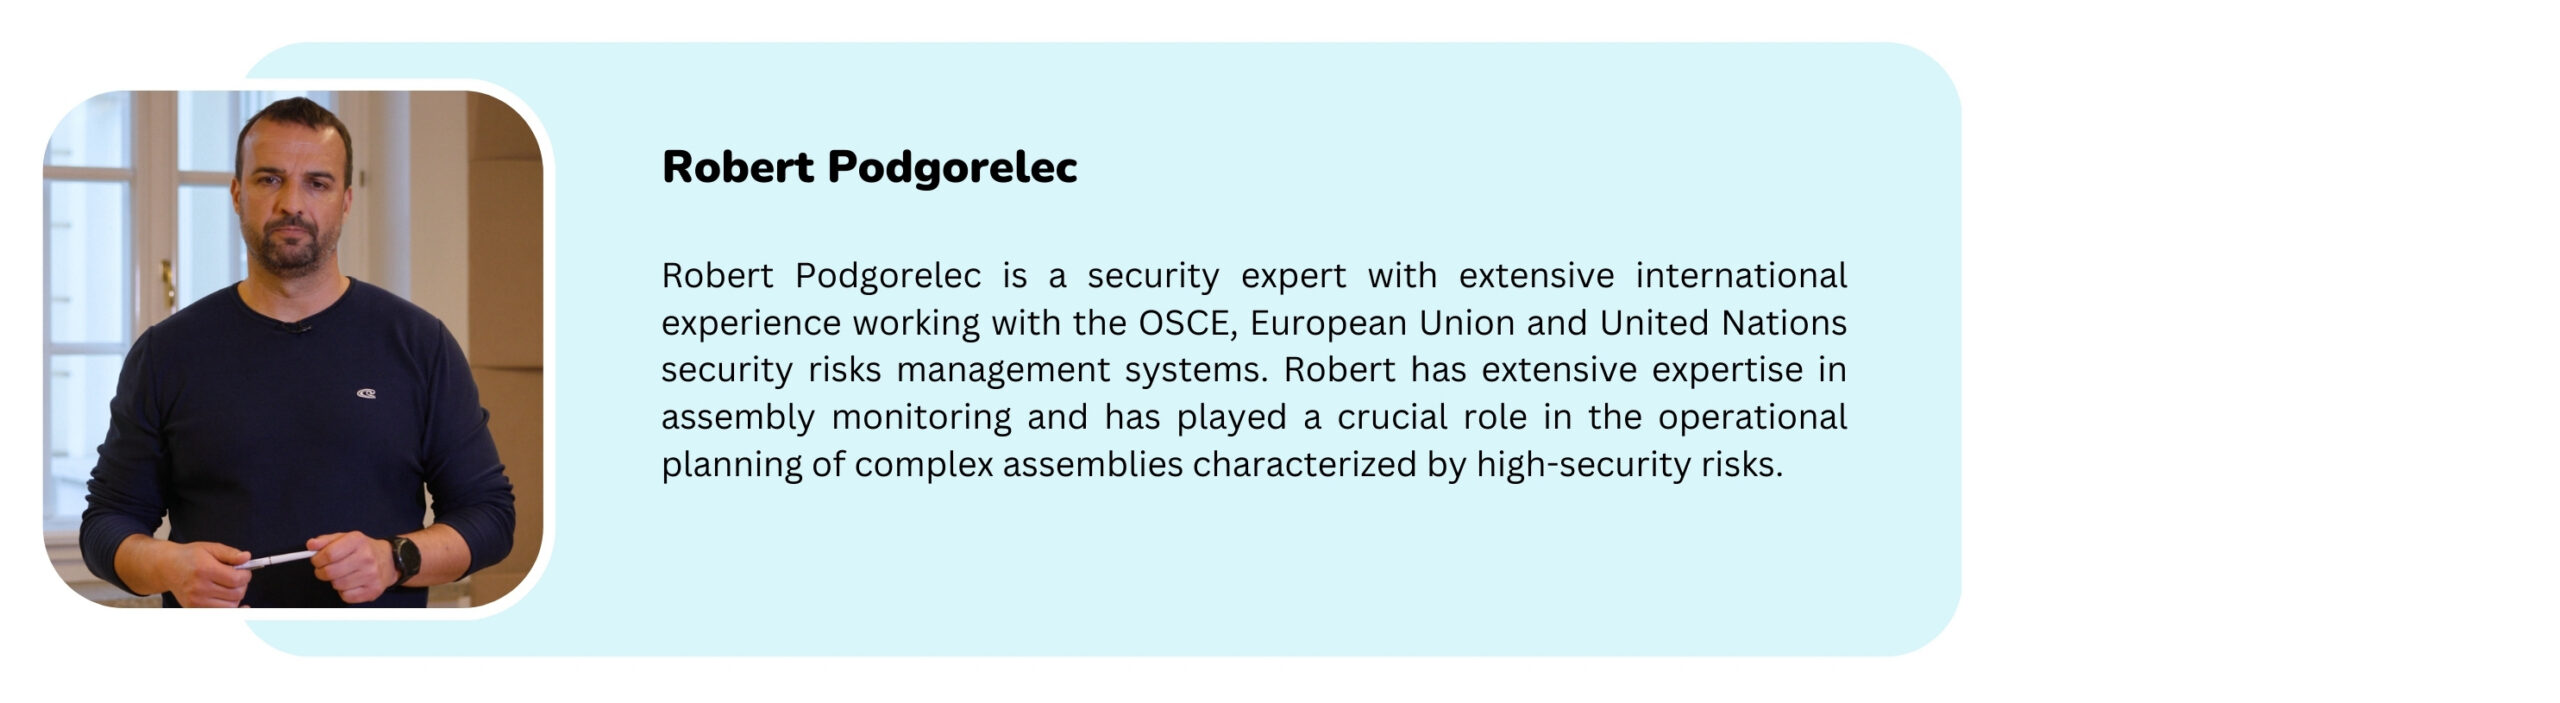 Picture of a trainer with the text "Robert Podgorelec is a security expert with extensive international experience working with the OSCE, European Union and United Nations security risks management systems. Robert has extensive expertise in assembly monitoring and has played a crucial role in the operational planning of complex assemblies characterized by high-security risks."